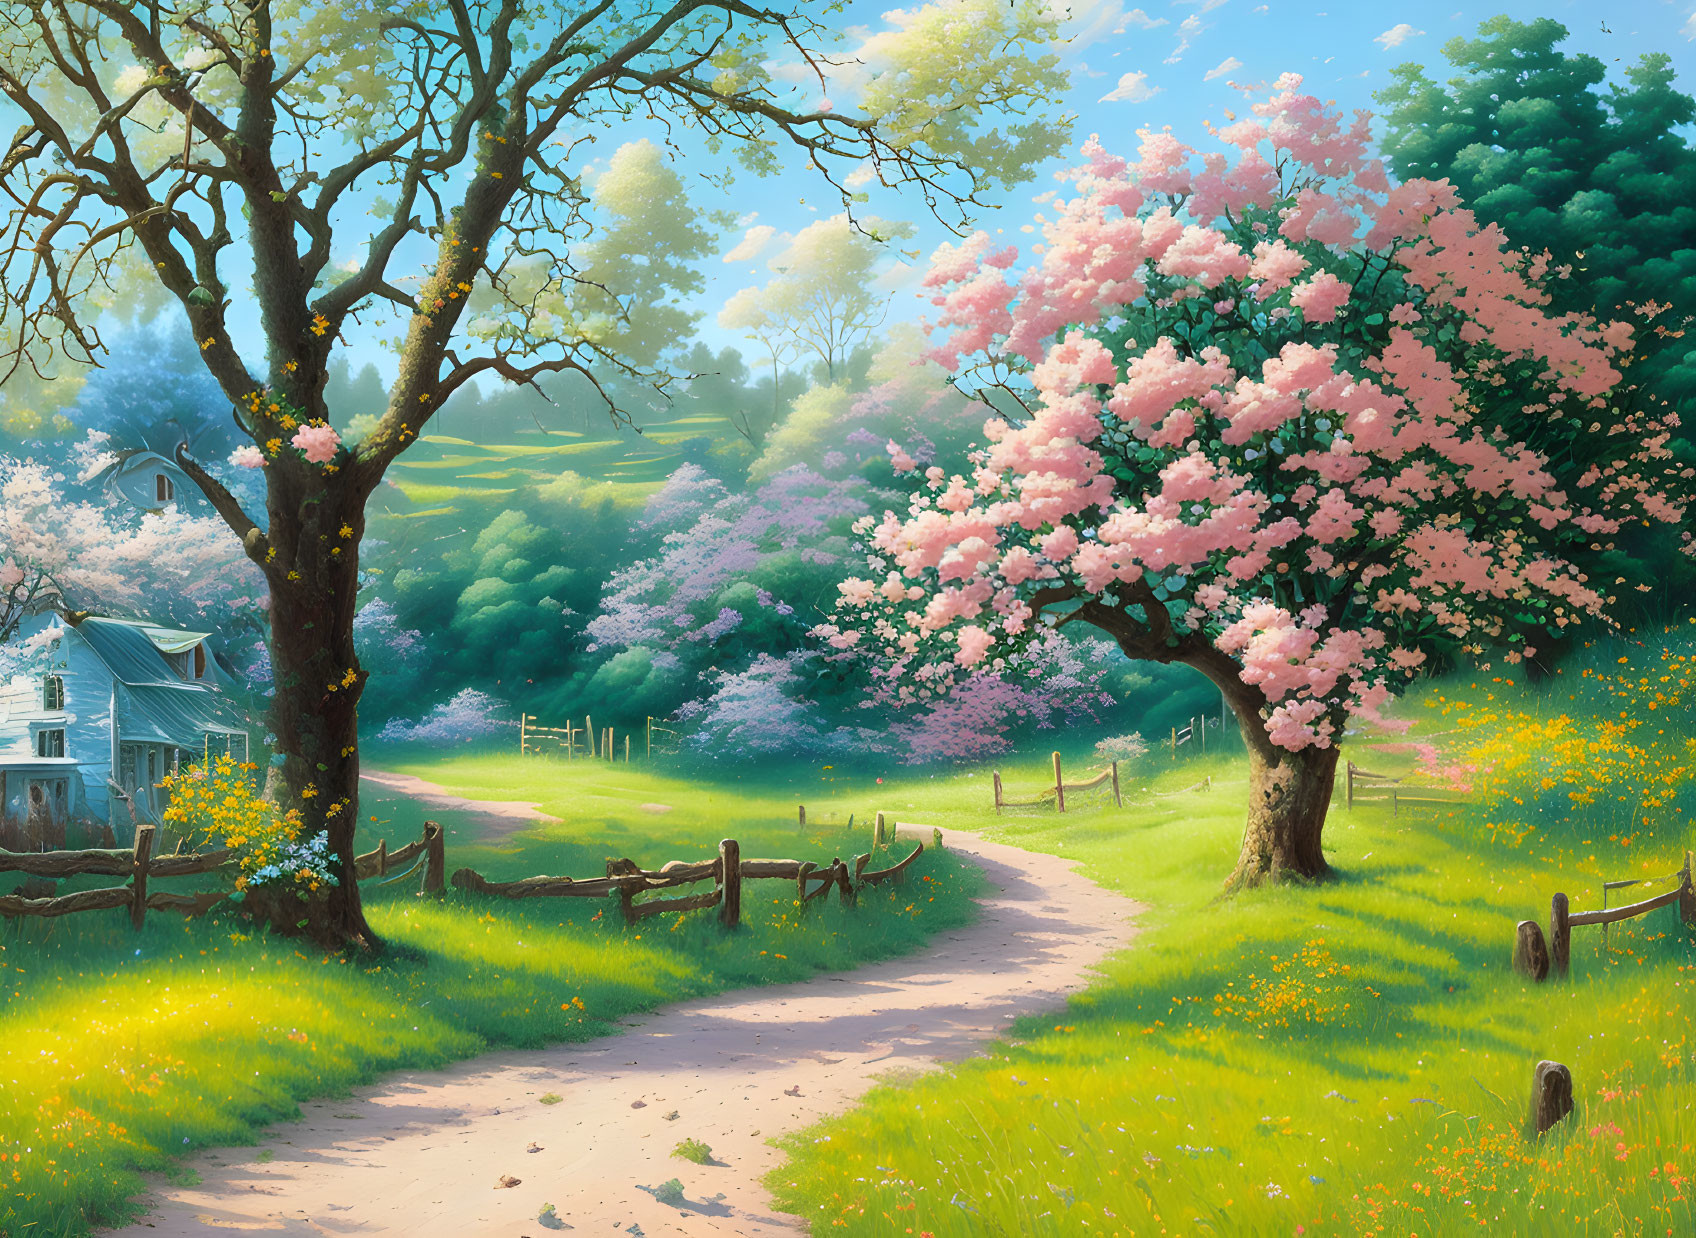 Blossoming trees and quaint house in vibrant countryside